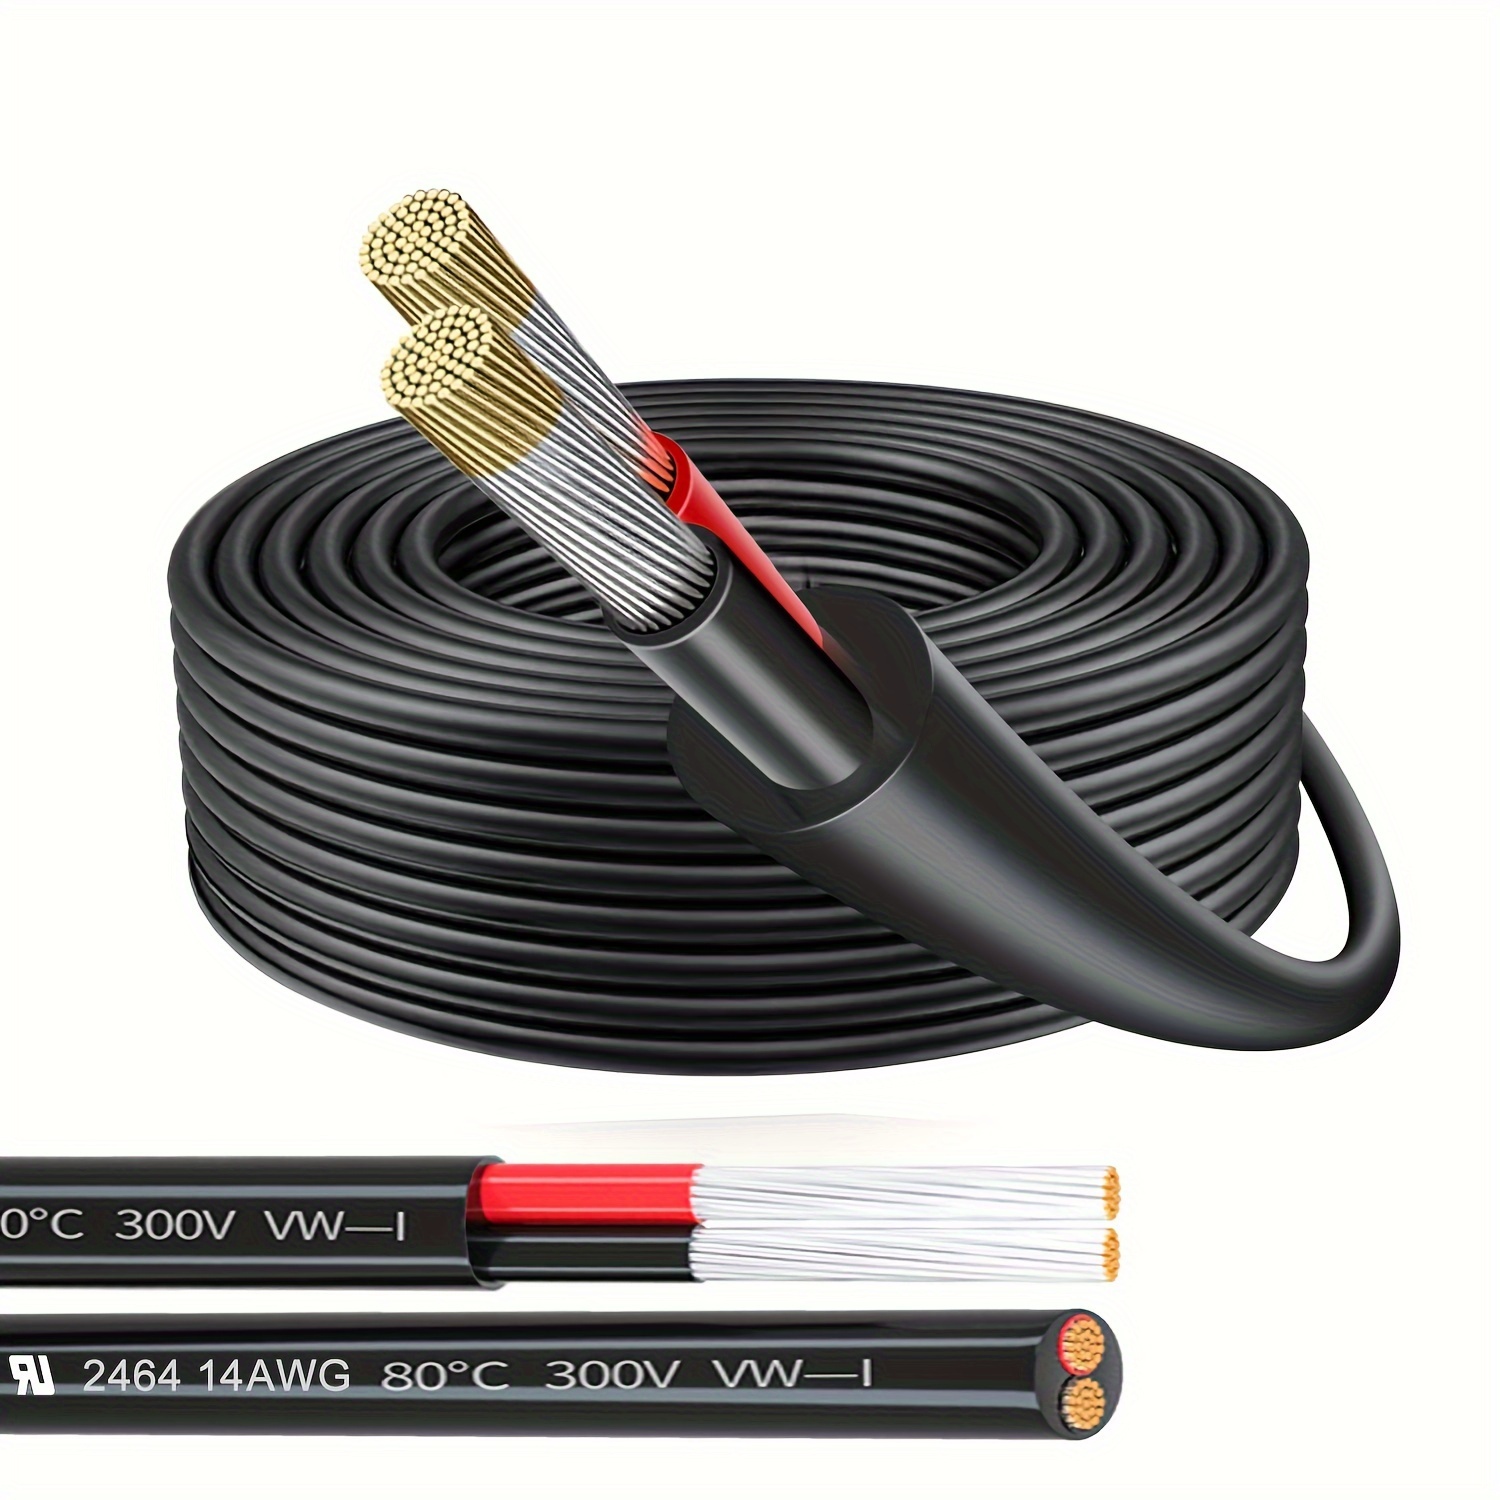 Dropship Gauge Electrical Hook Up Wire Silicone Stranded Wire Spool 5ft  10ft 25ft 50ft 100ft Each Black And Red Flexible AWG Tinned Copper to Sell  Online at a Lower Price